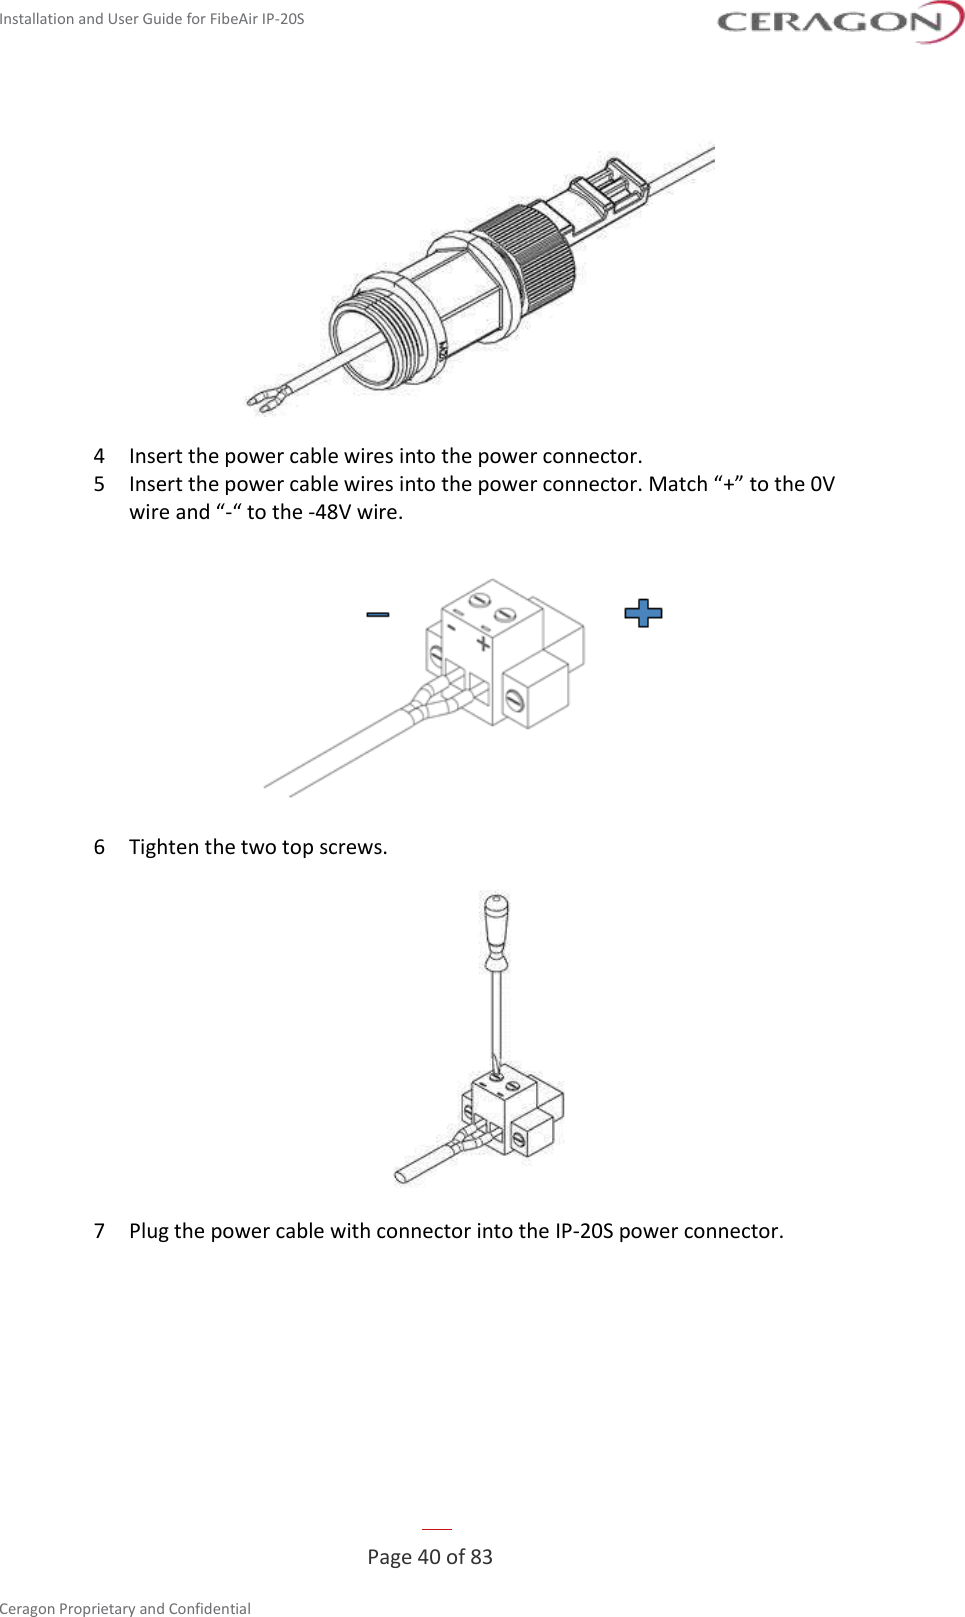 Installation and User Guide for FibeAir IP-20S   Page 40 of 83  Ceragon Proprietary and Confidential      4  Insert the power cable wires into the power connector. 5  Insert the power cable wires into the power connector. Match “+” to the 0V wire and “-“ to the -48V wire.  6  Tighten the two top screws.  7  Plug the power cable with connector into the IP-20S power connector. 